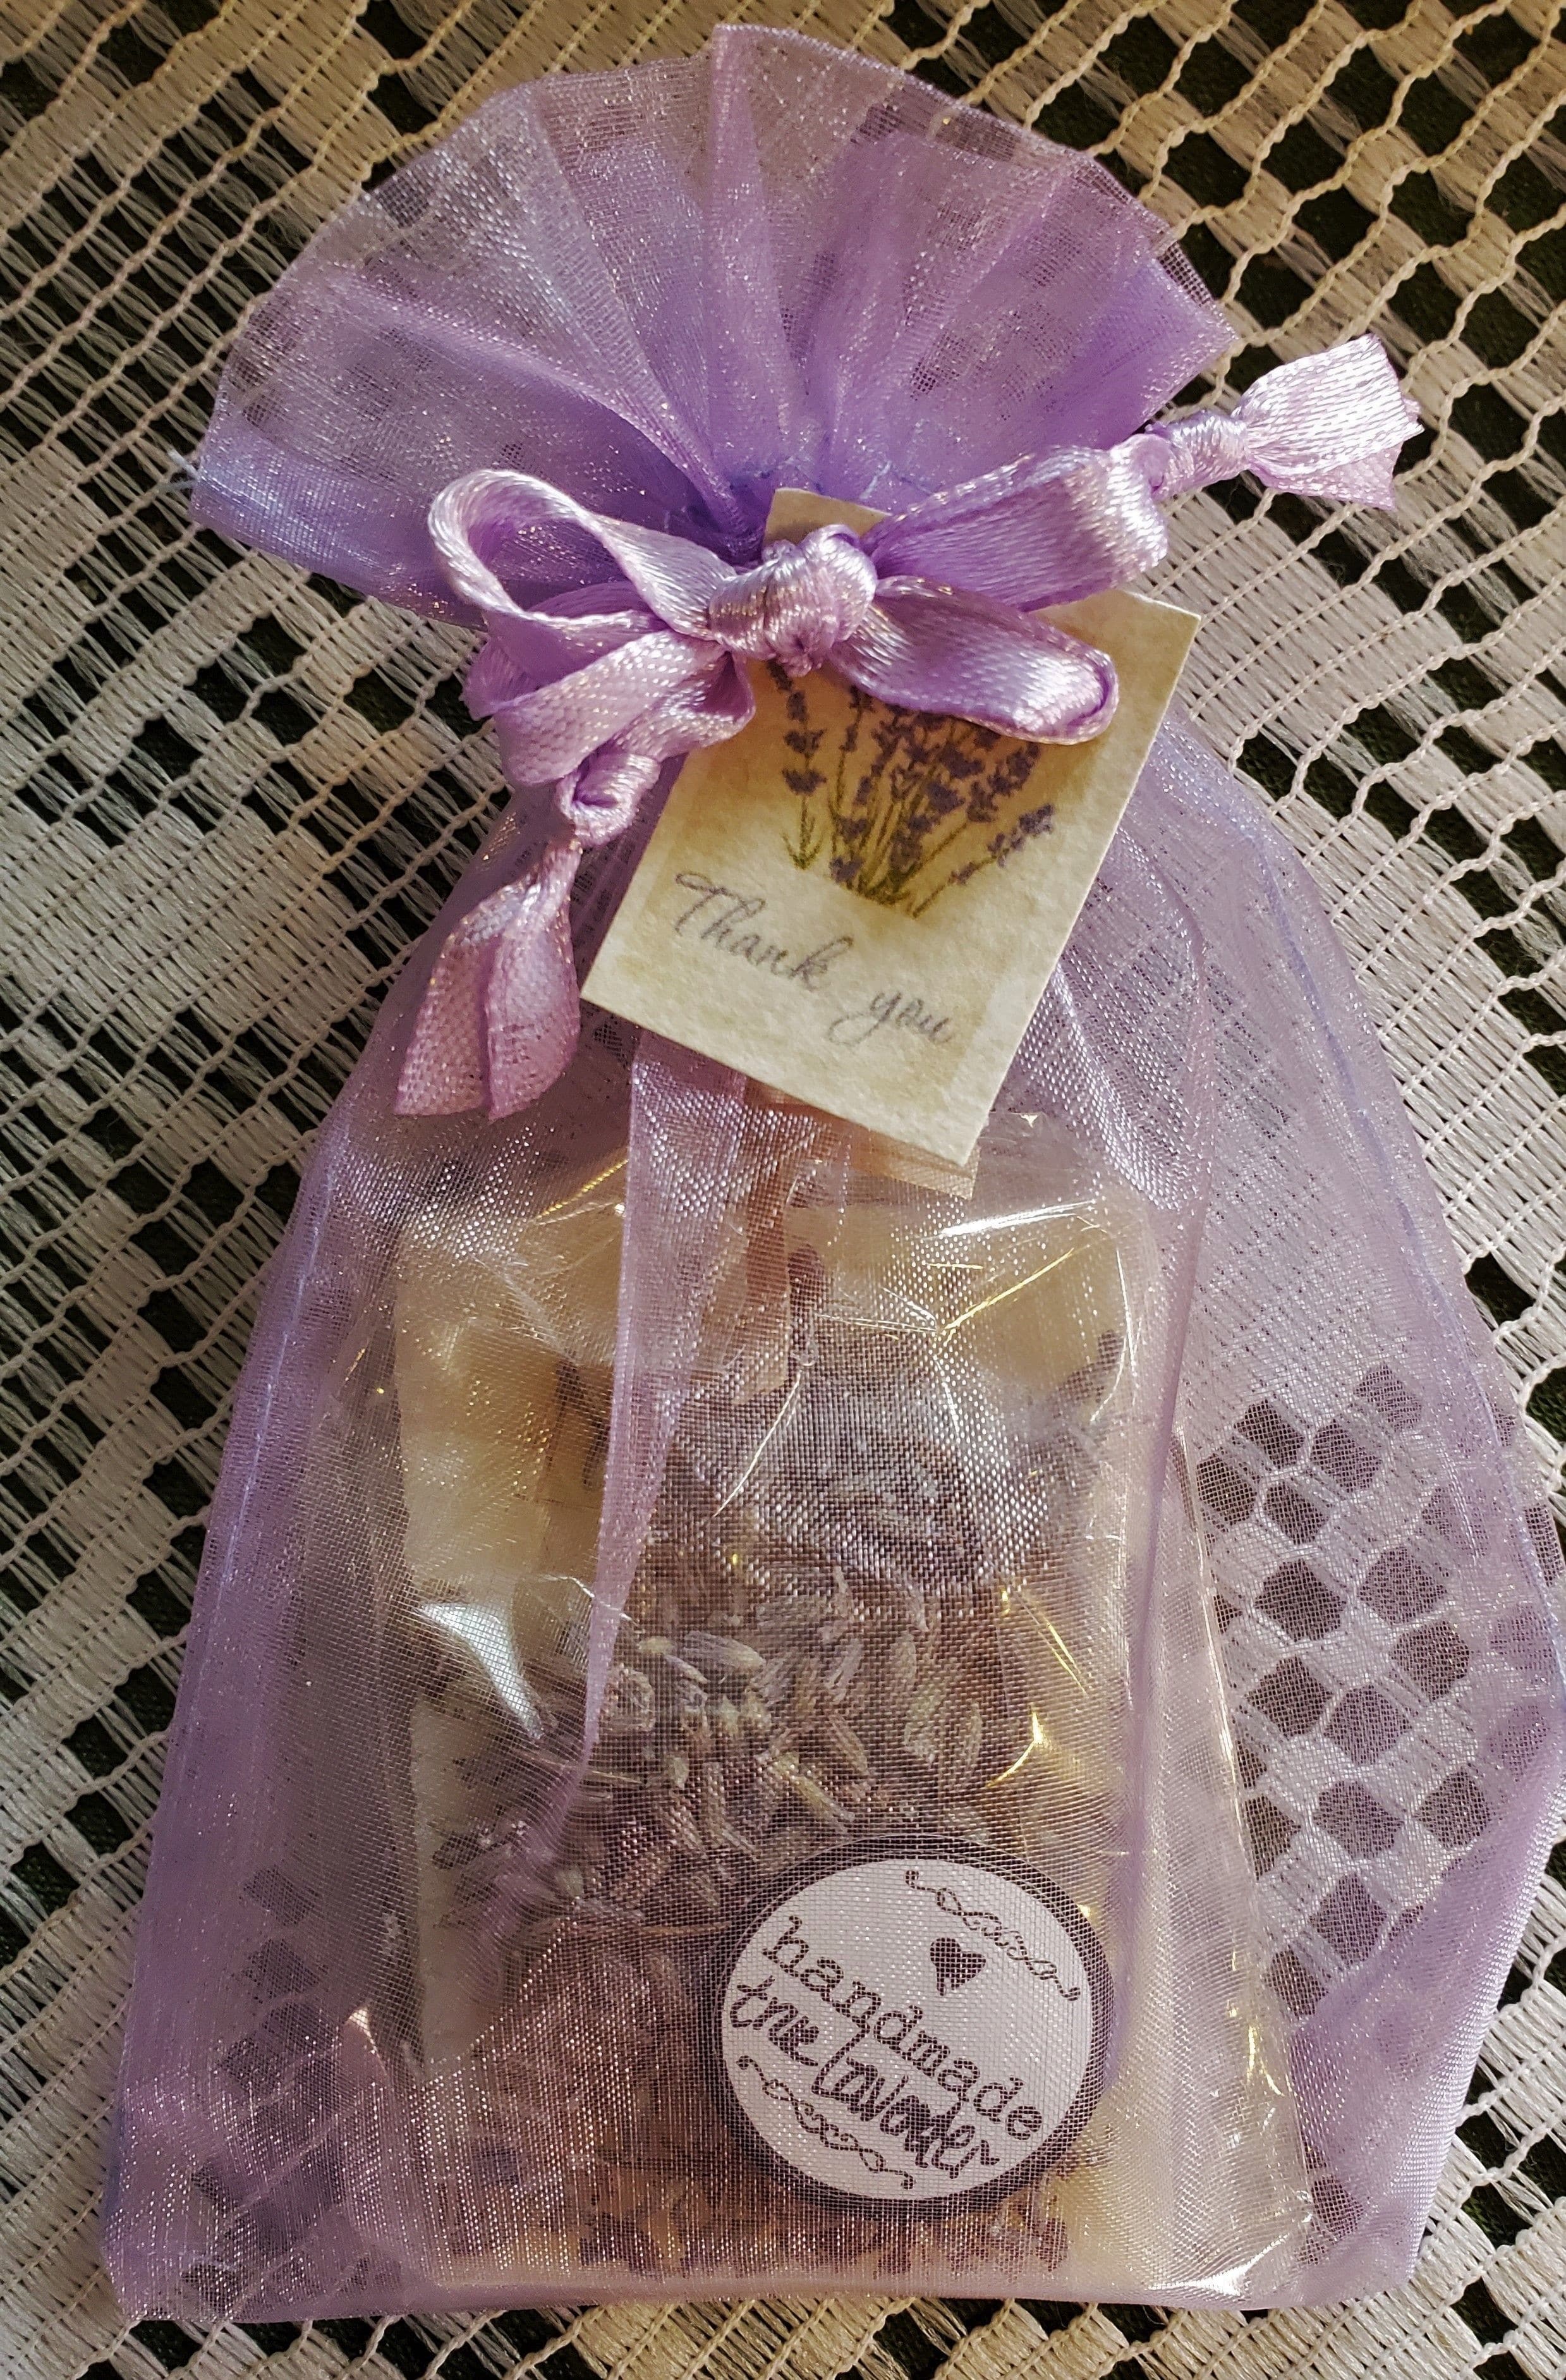 Our true lavender soap favours make the perfect little gift for any occasion.  Decorated with organic lavender, this soap is an elegant 100% natural gift soap.